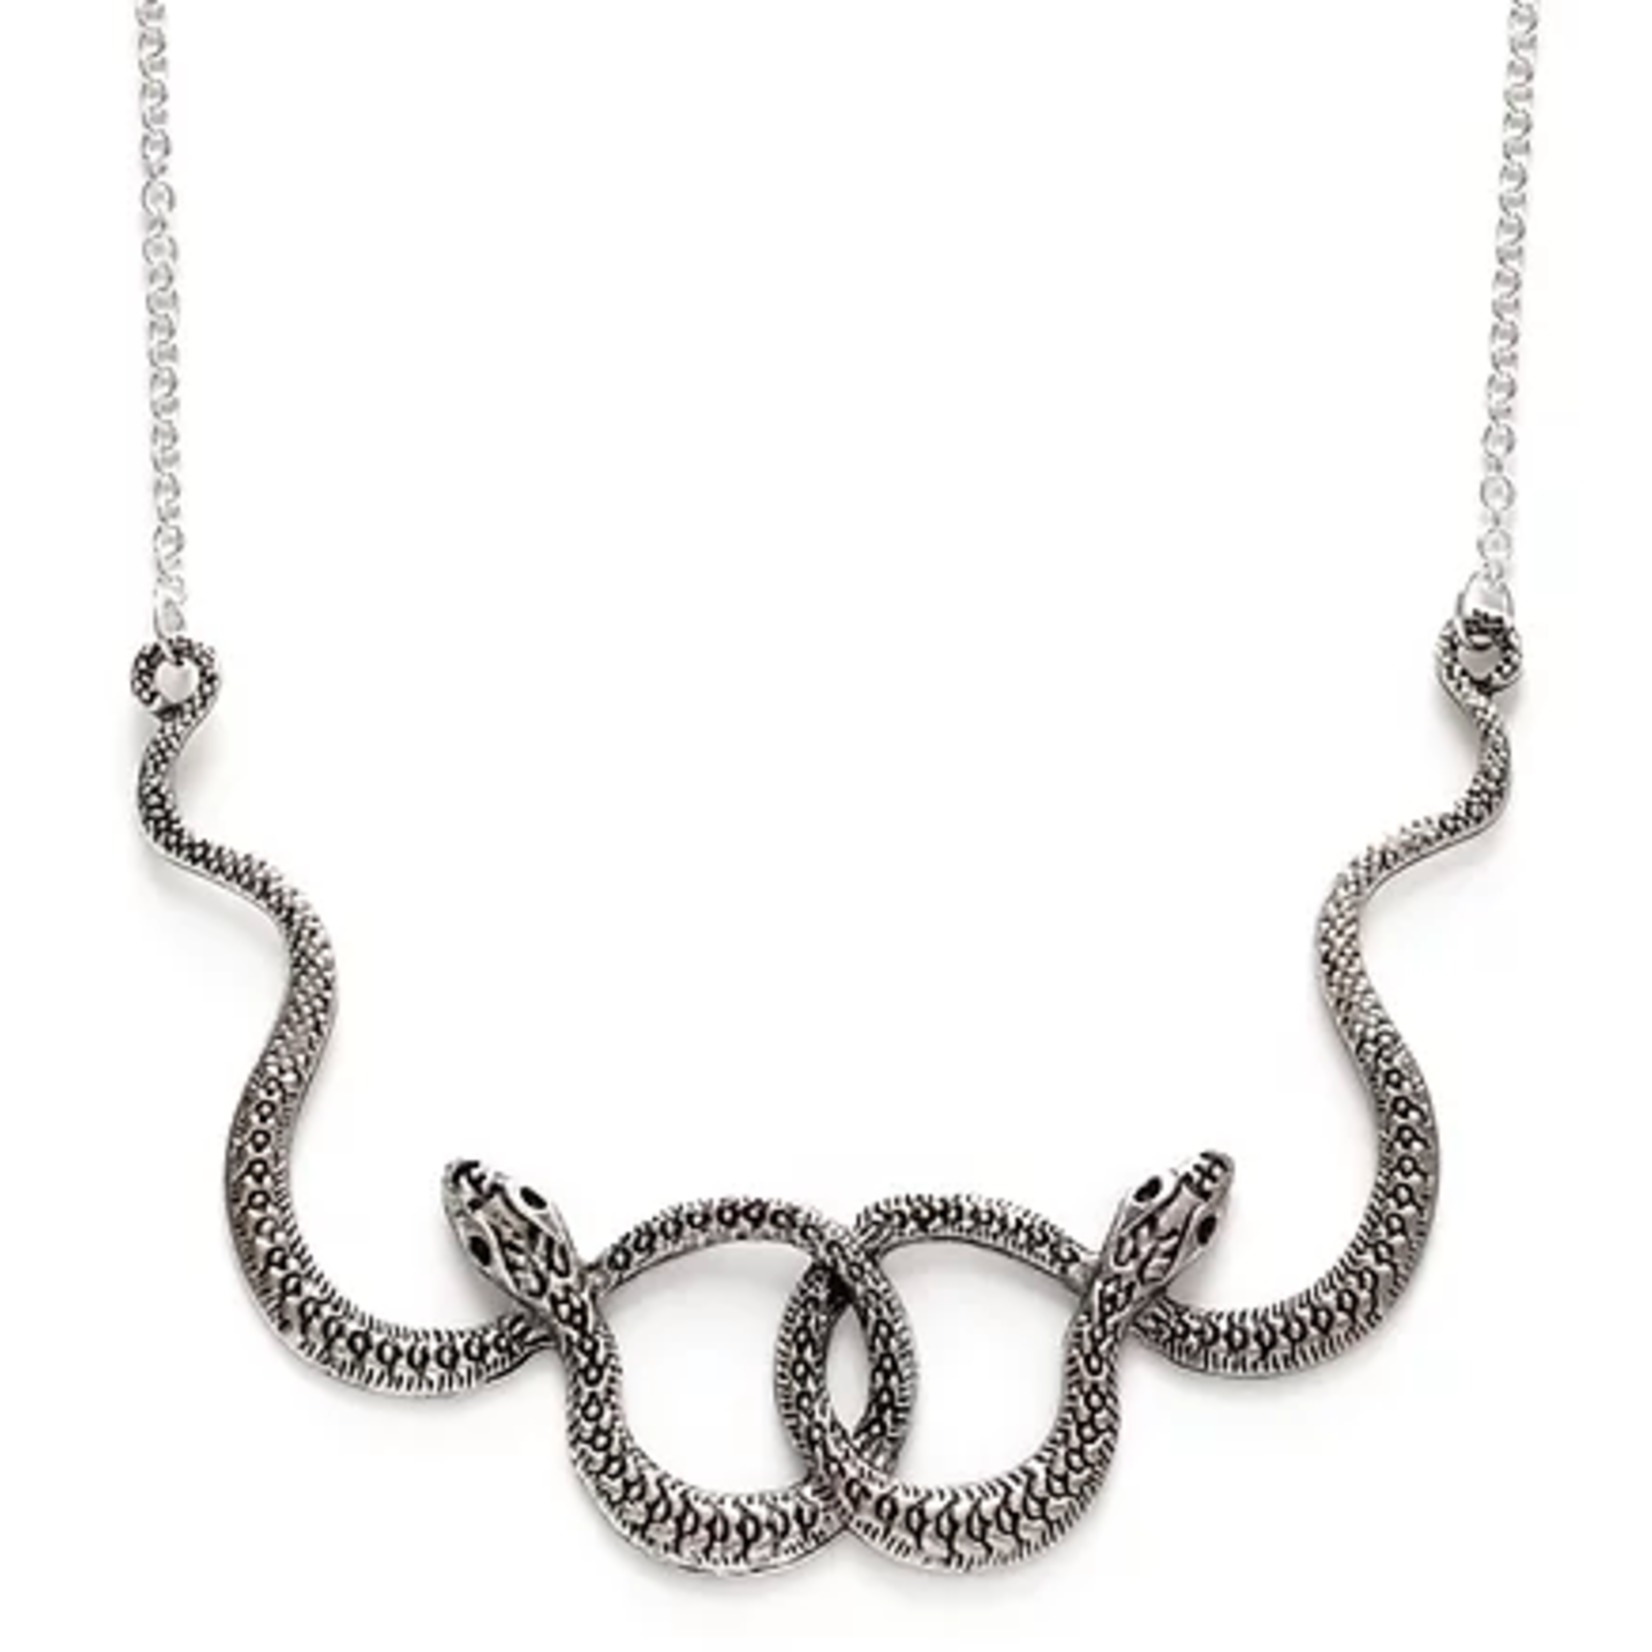 Ophidian Statement Necklace - Silver